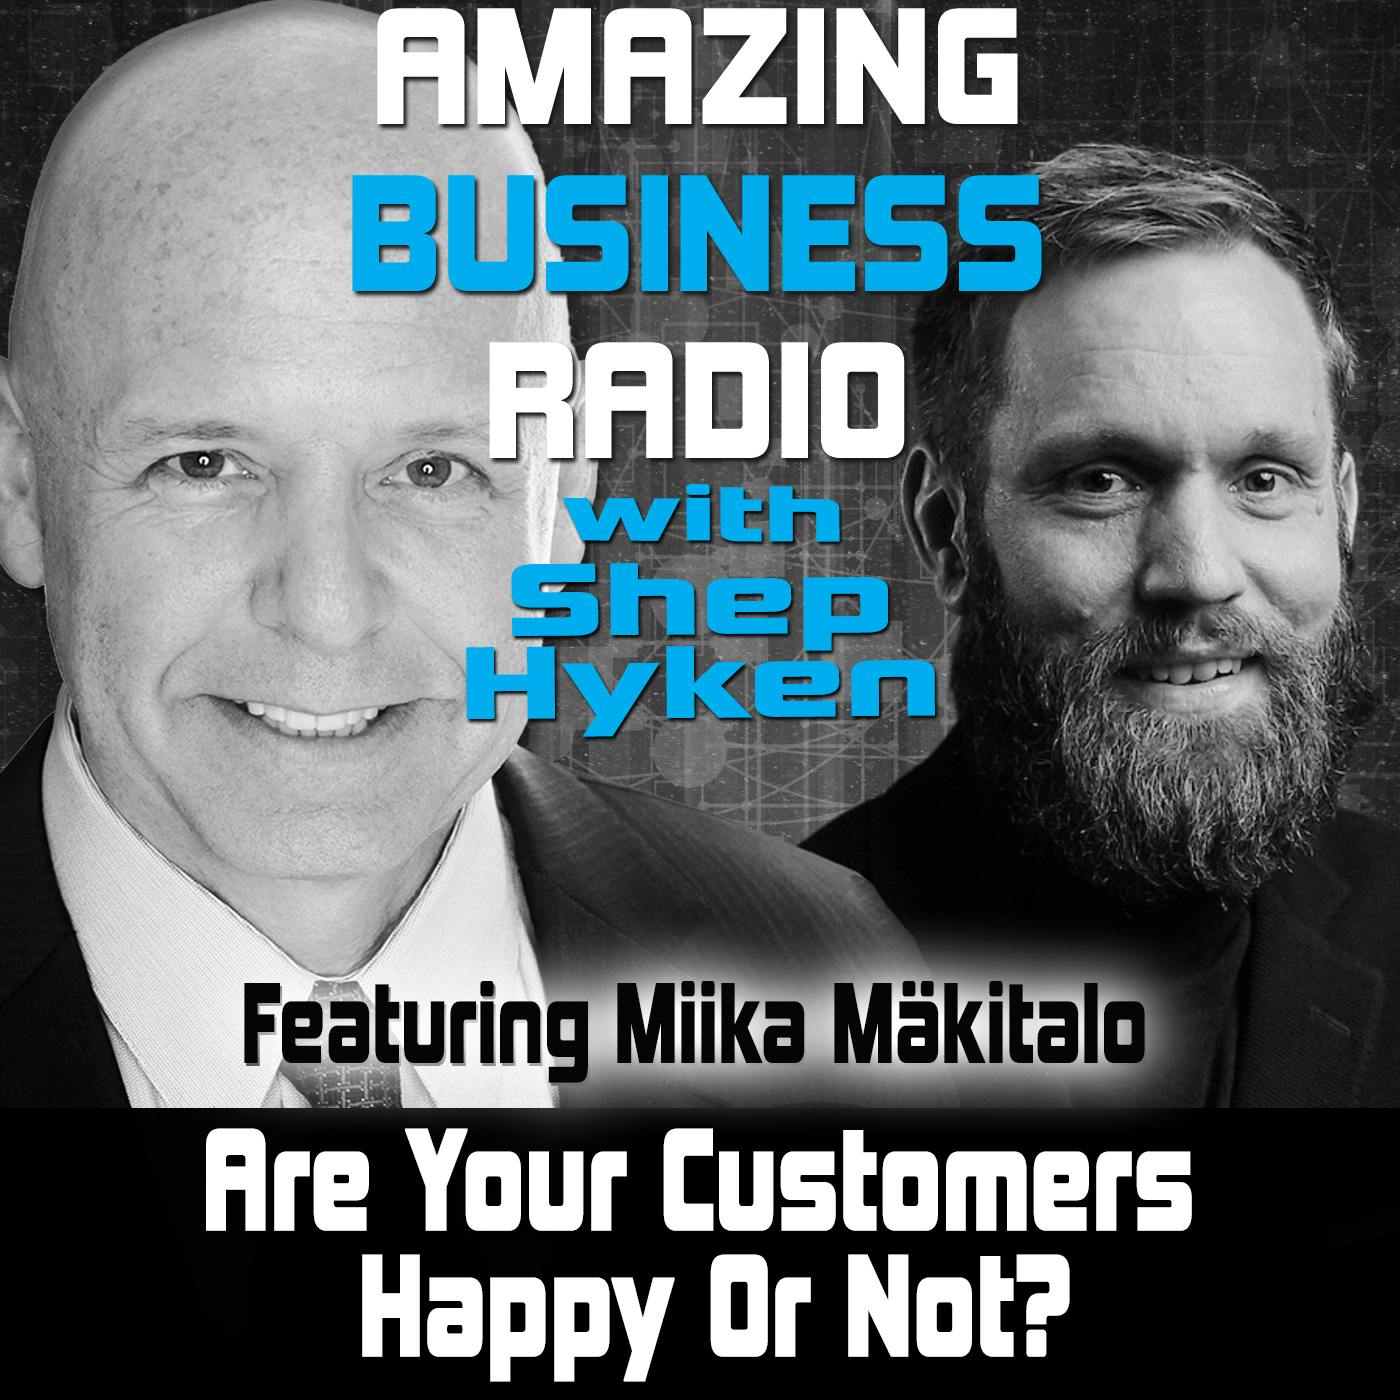 Are Your Customers Happy Or Not? Featuring Miika Mäkitalo